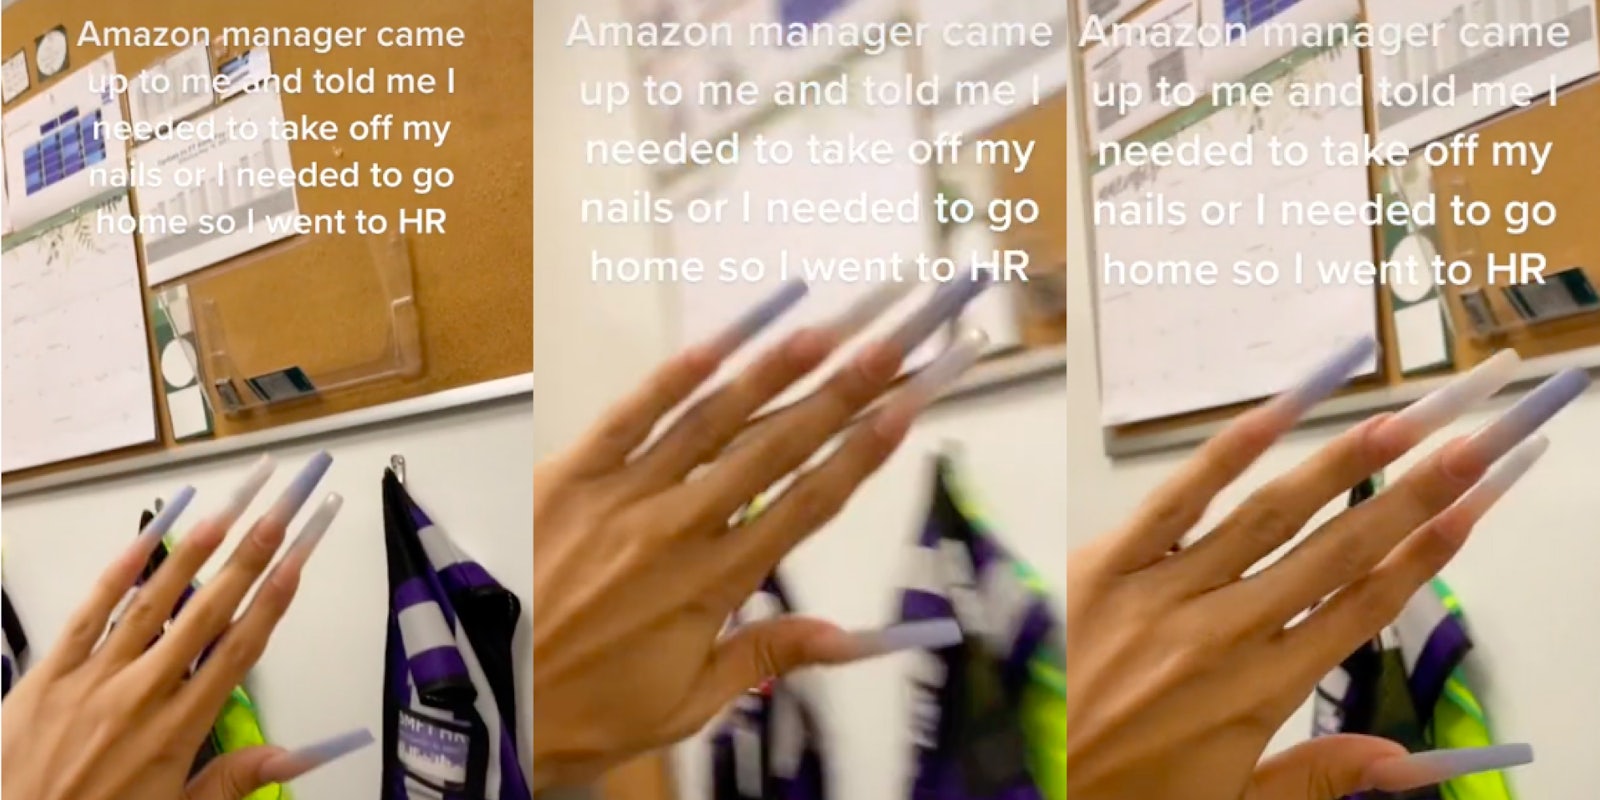 Amazon worker fired for long nails